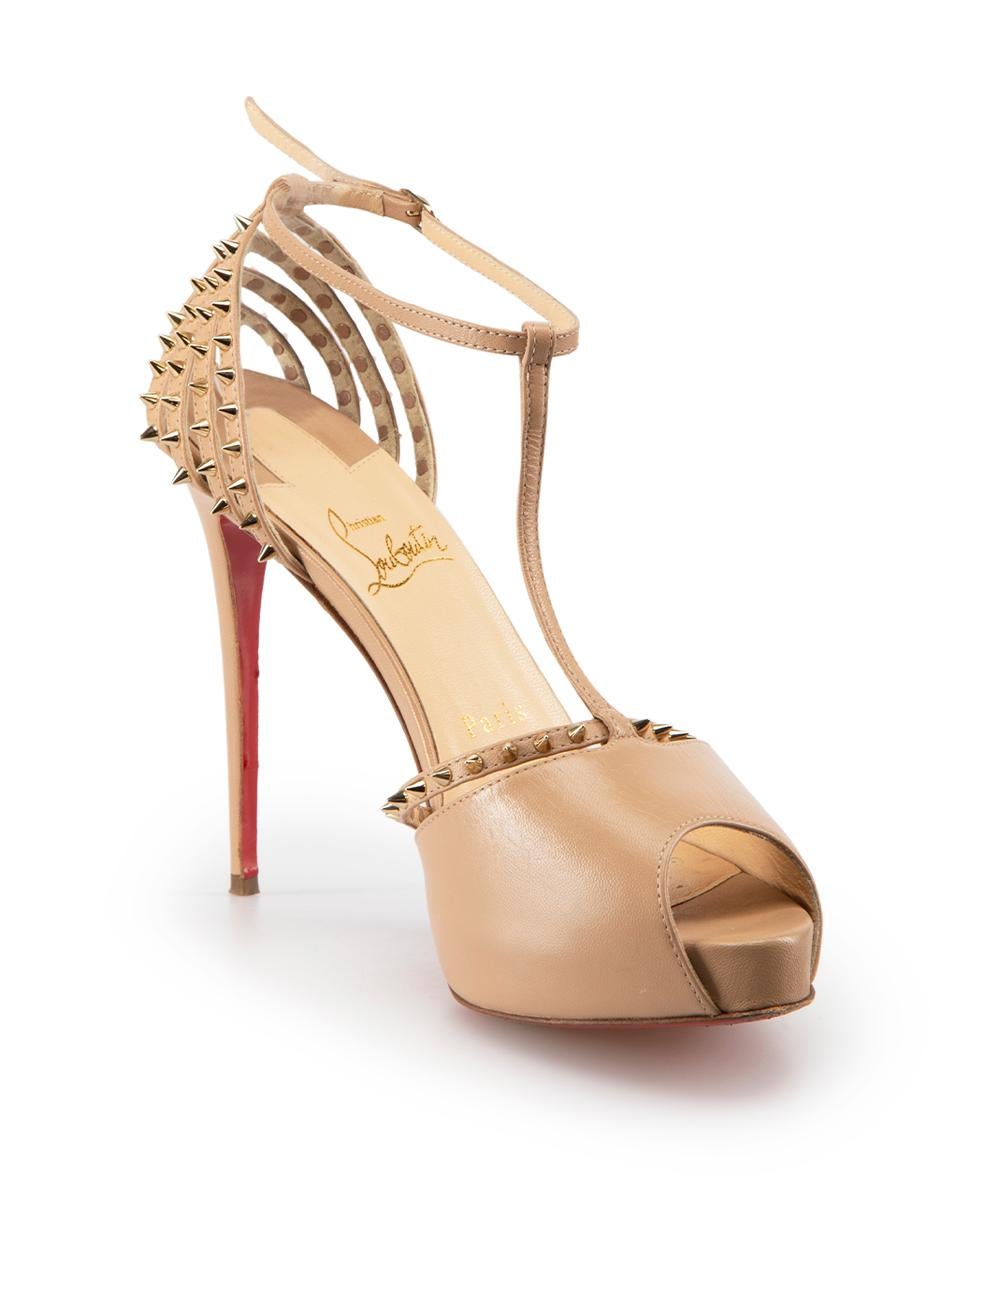 CONDITION is Very good. Minimal wear to heels is evident. Hardly any visible wear to uppers found however the outsoles show noticeable signs of abrasion on this used Christian Louboutin designer resale item.

Details
Beige
Leather
Heeled